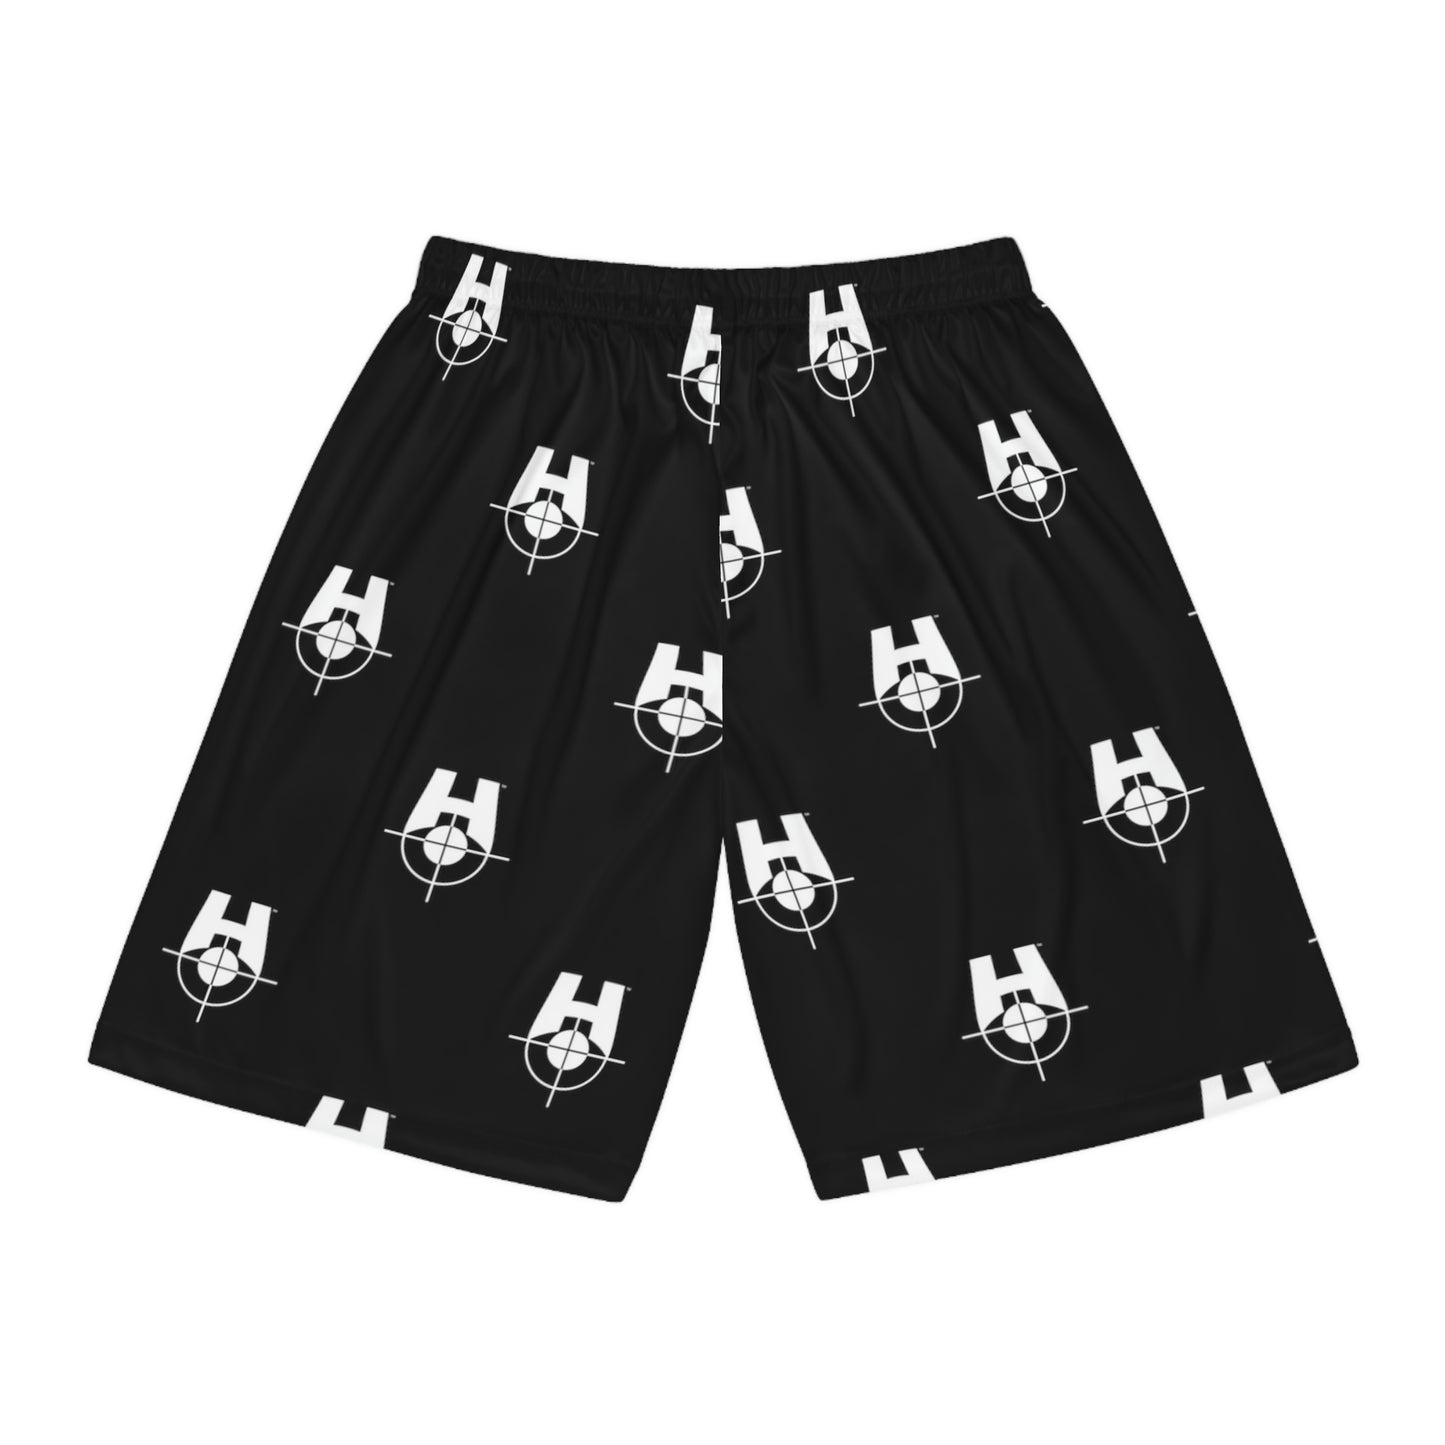 Classic "Harget" Patterned Basketball Shorts